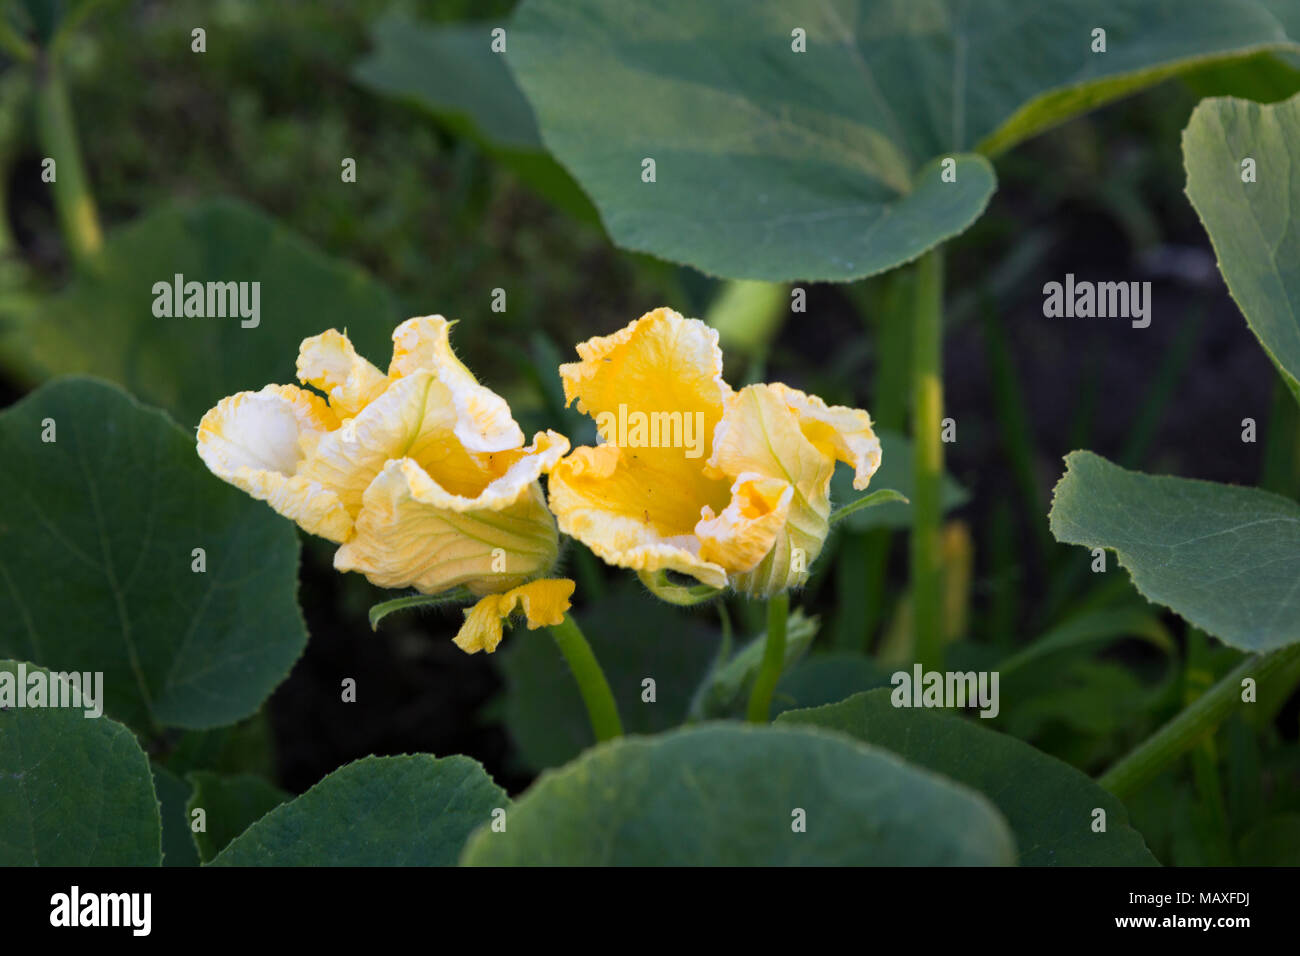 Blooming courgette plants close up Stock Photo